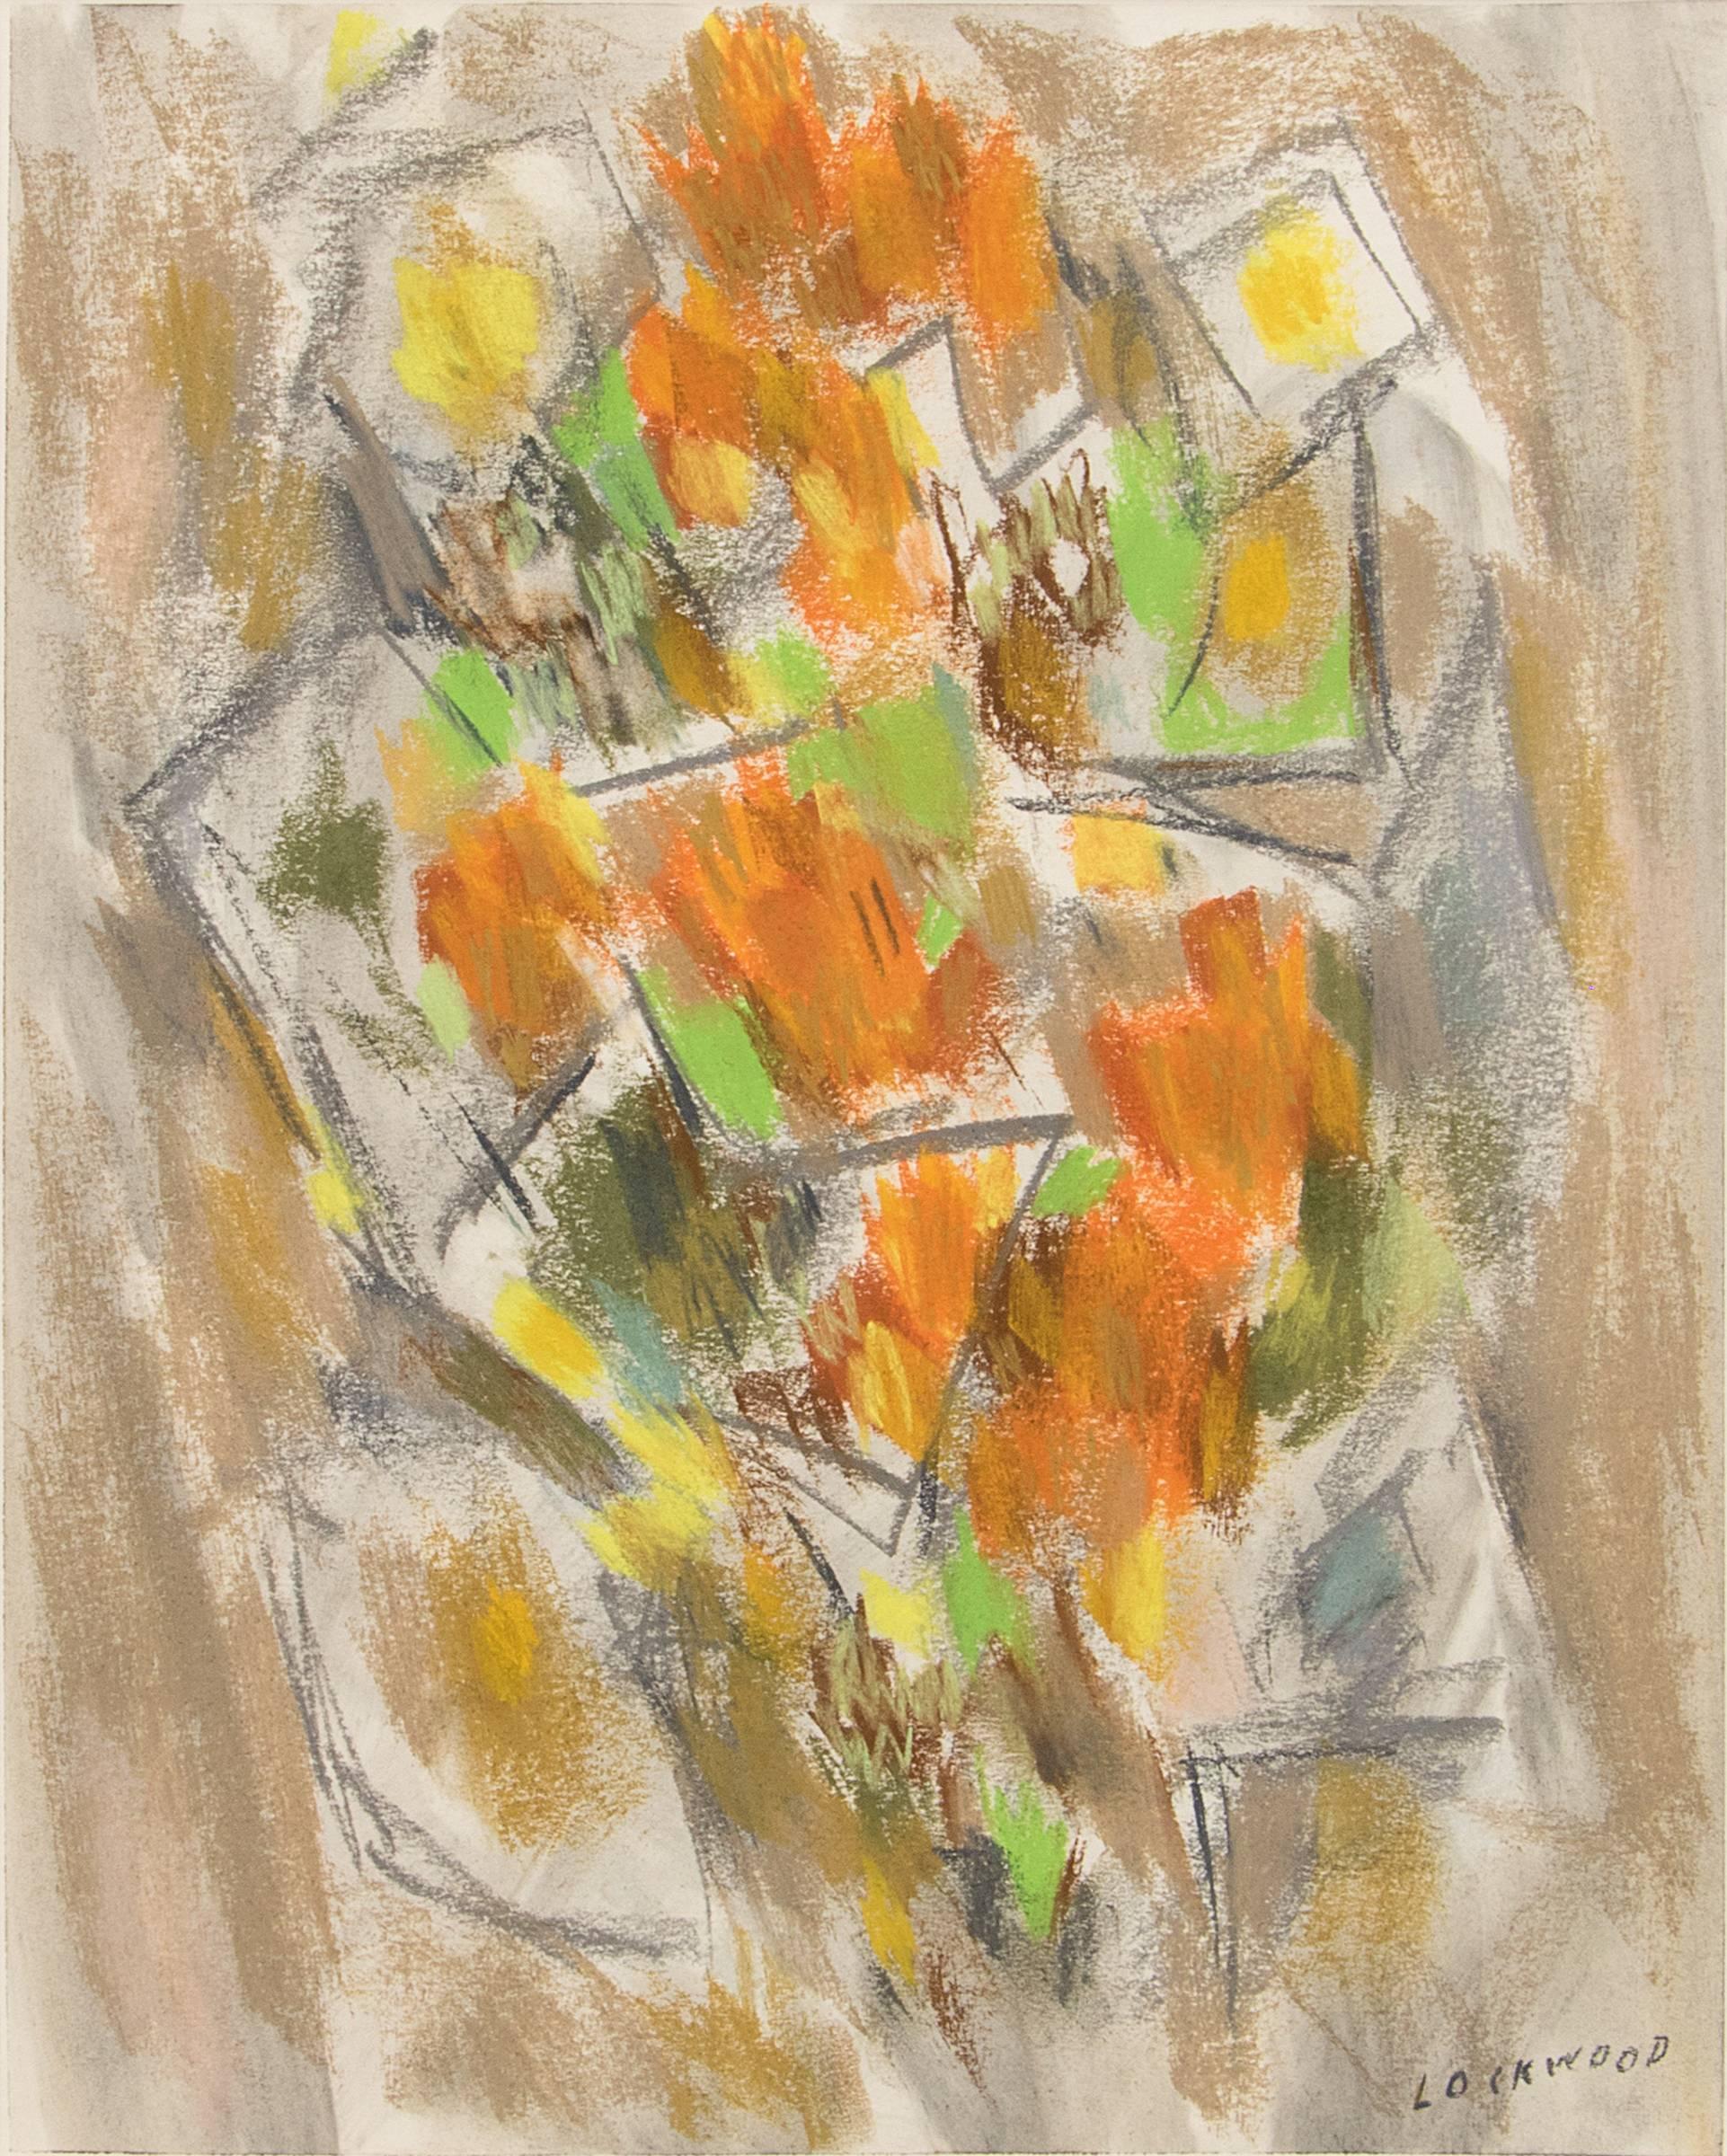 1950s Abstract Floral Still Life Drawing, Mid Century Modern Pastel Drawing - Painting by John Ward Lockwood